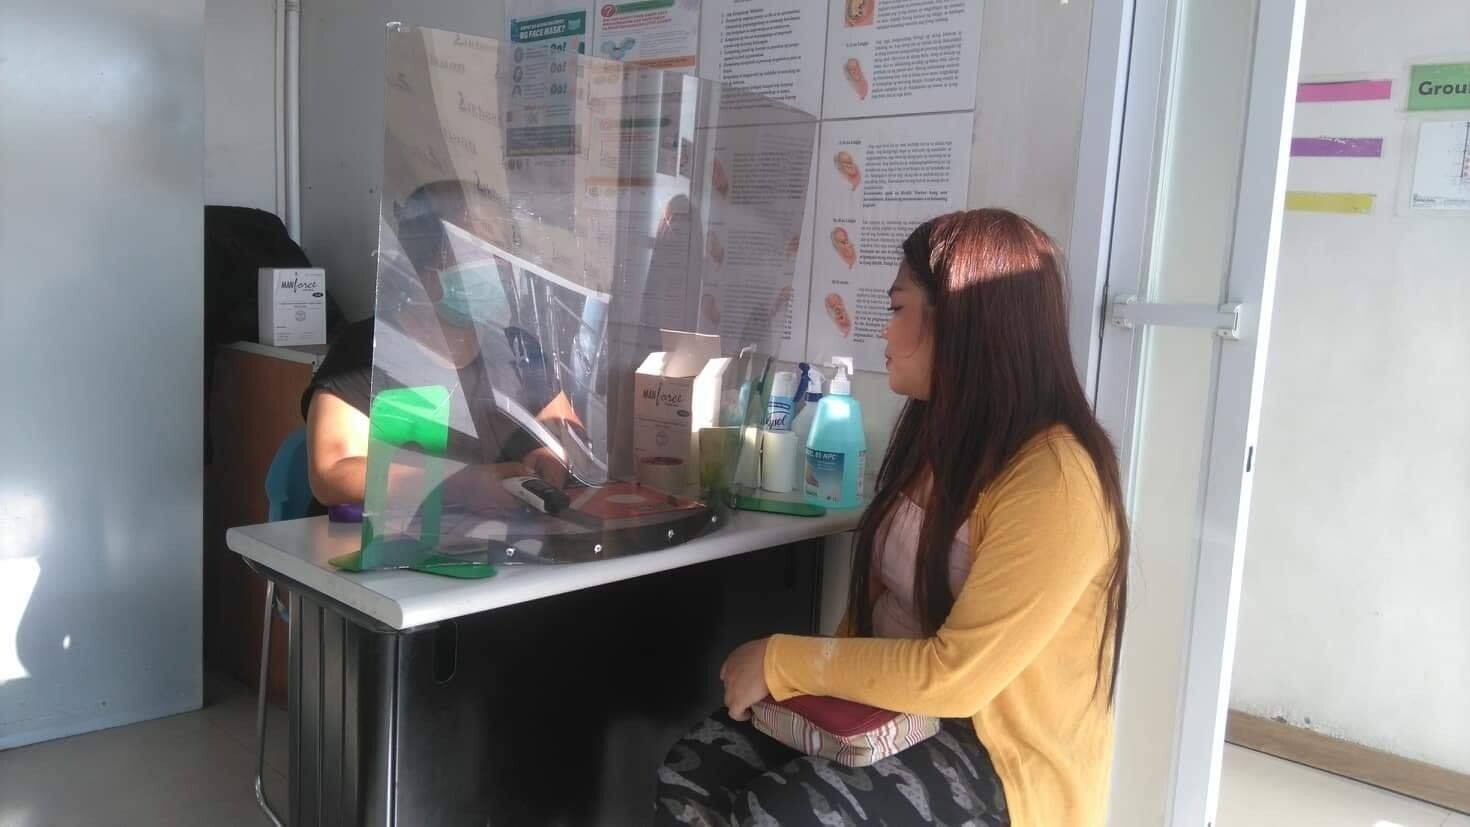 A mother-to-be receives family planning counselling at a Likhaan clinic in Manila. About 2.5 million unplanned pregnancies are expected in the country this year. Photo: Handout